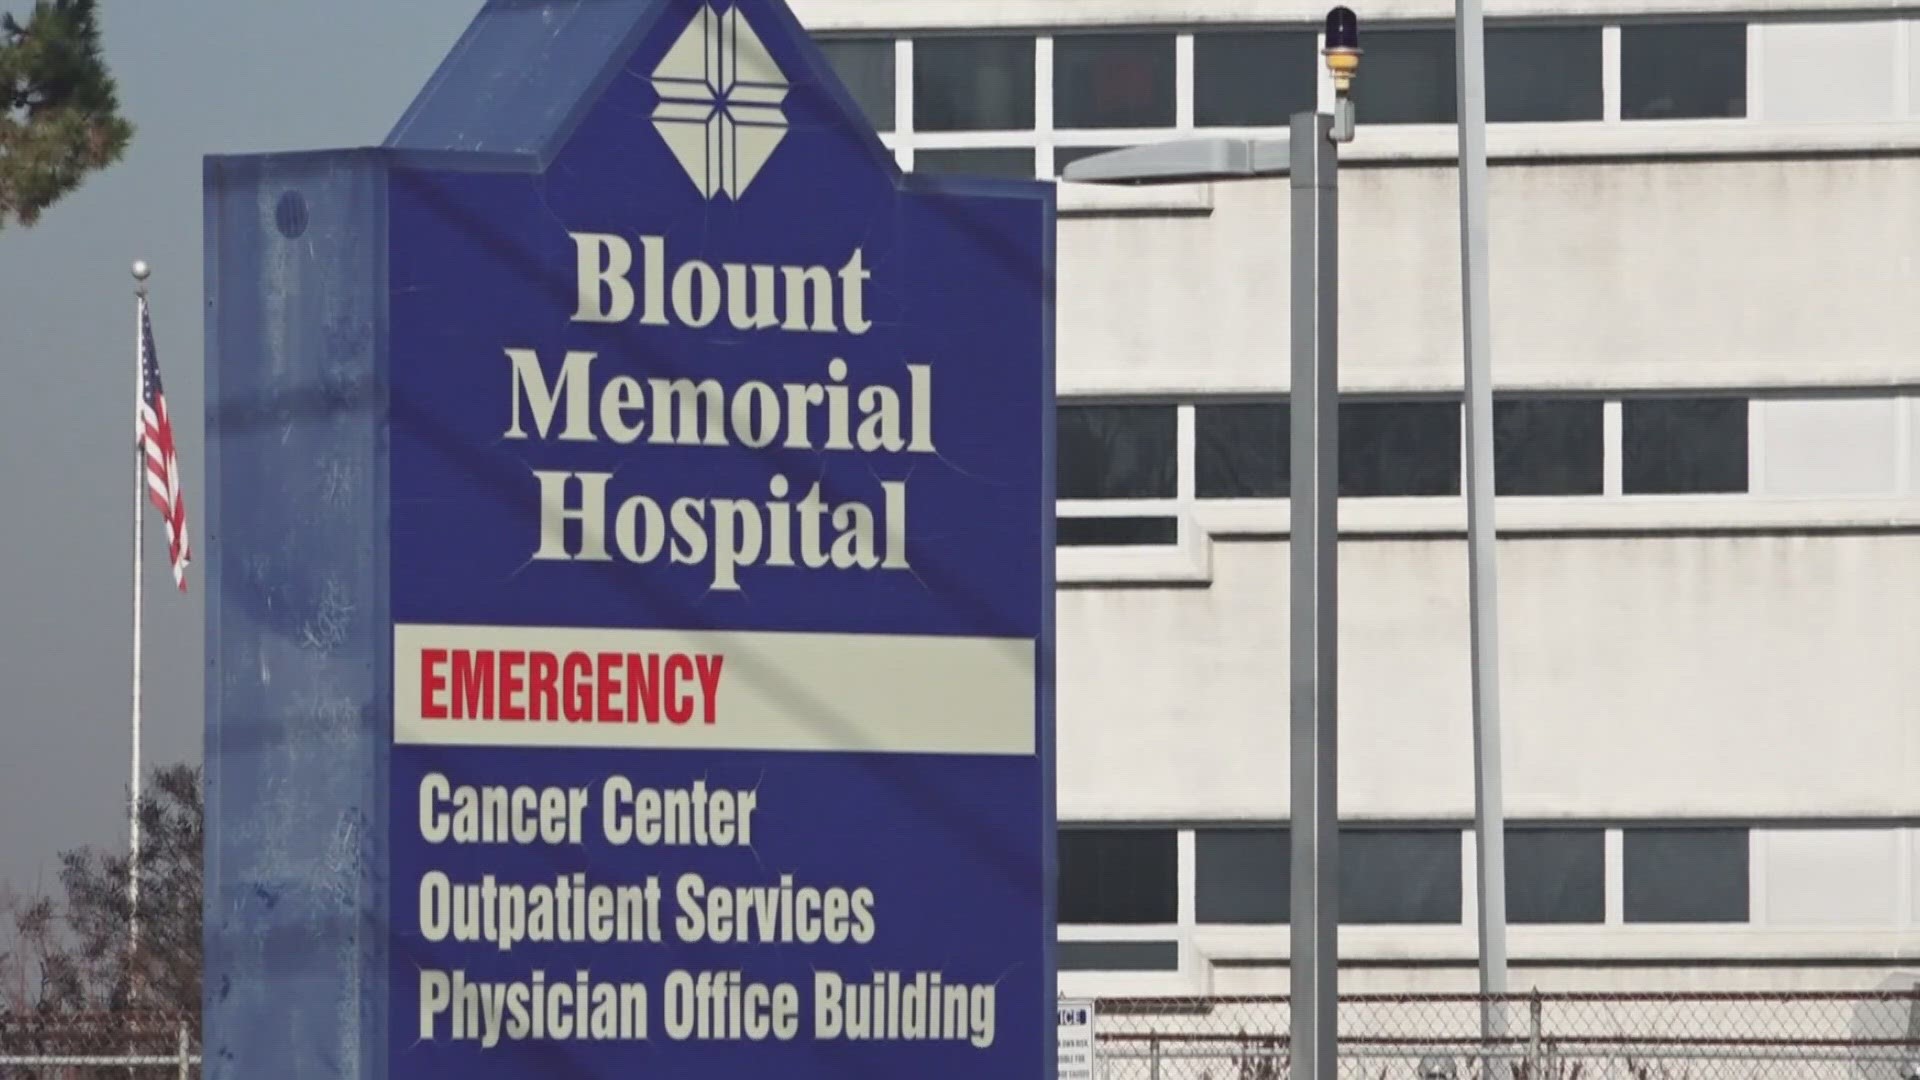 The news follows an agreement that ended years of contention between the hospital and Blount County.